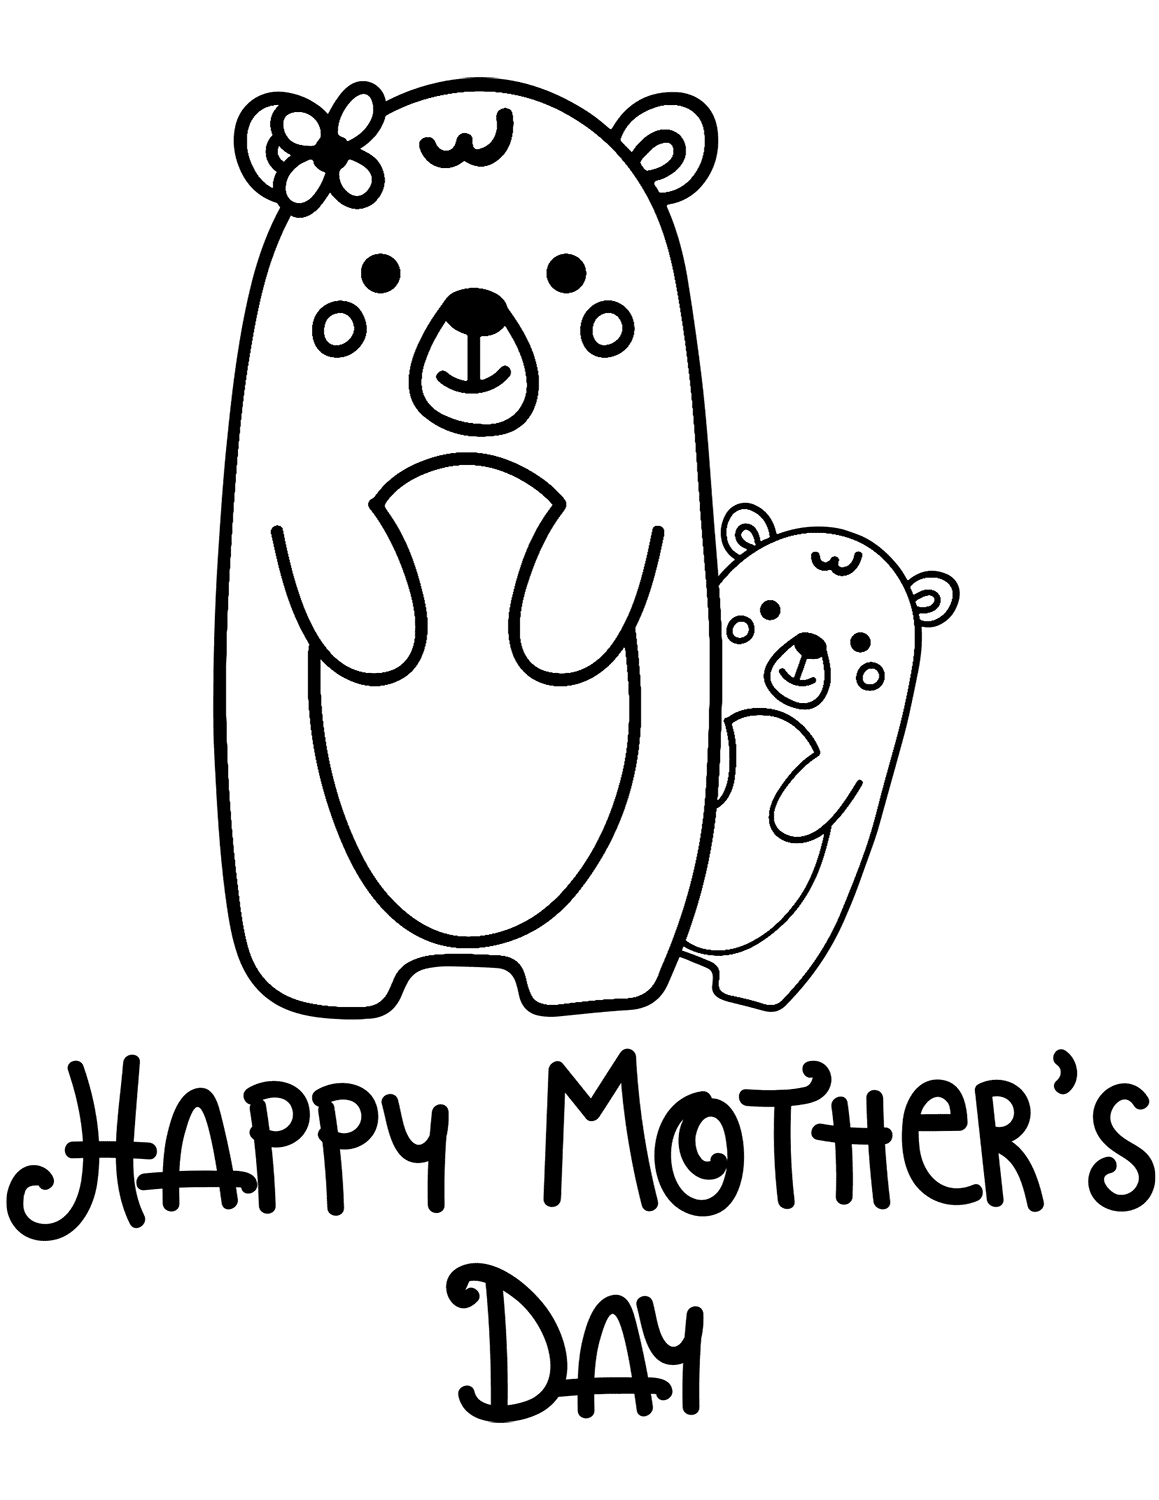 Download 30 Free Printable Mother's Day Coloring Pages